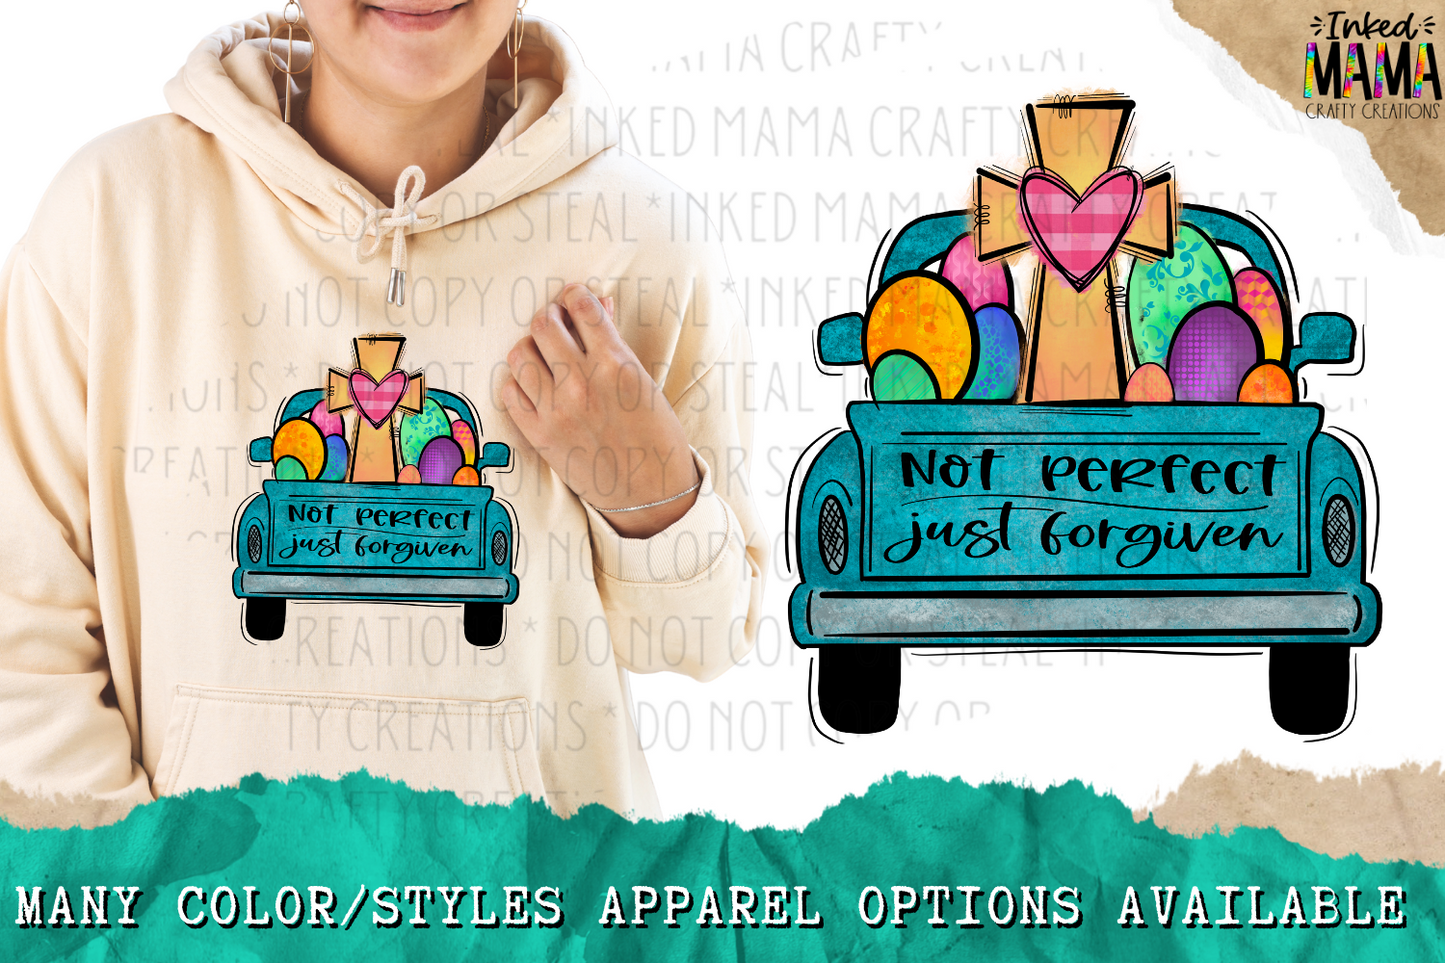 Not perfect just forgiven - Vintage Truck with cross - Easter Apparel